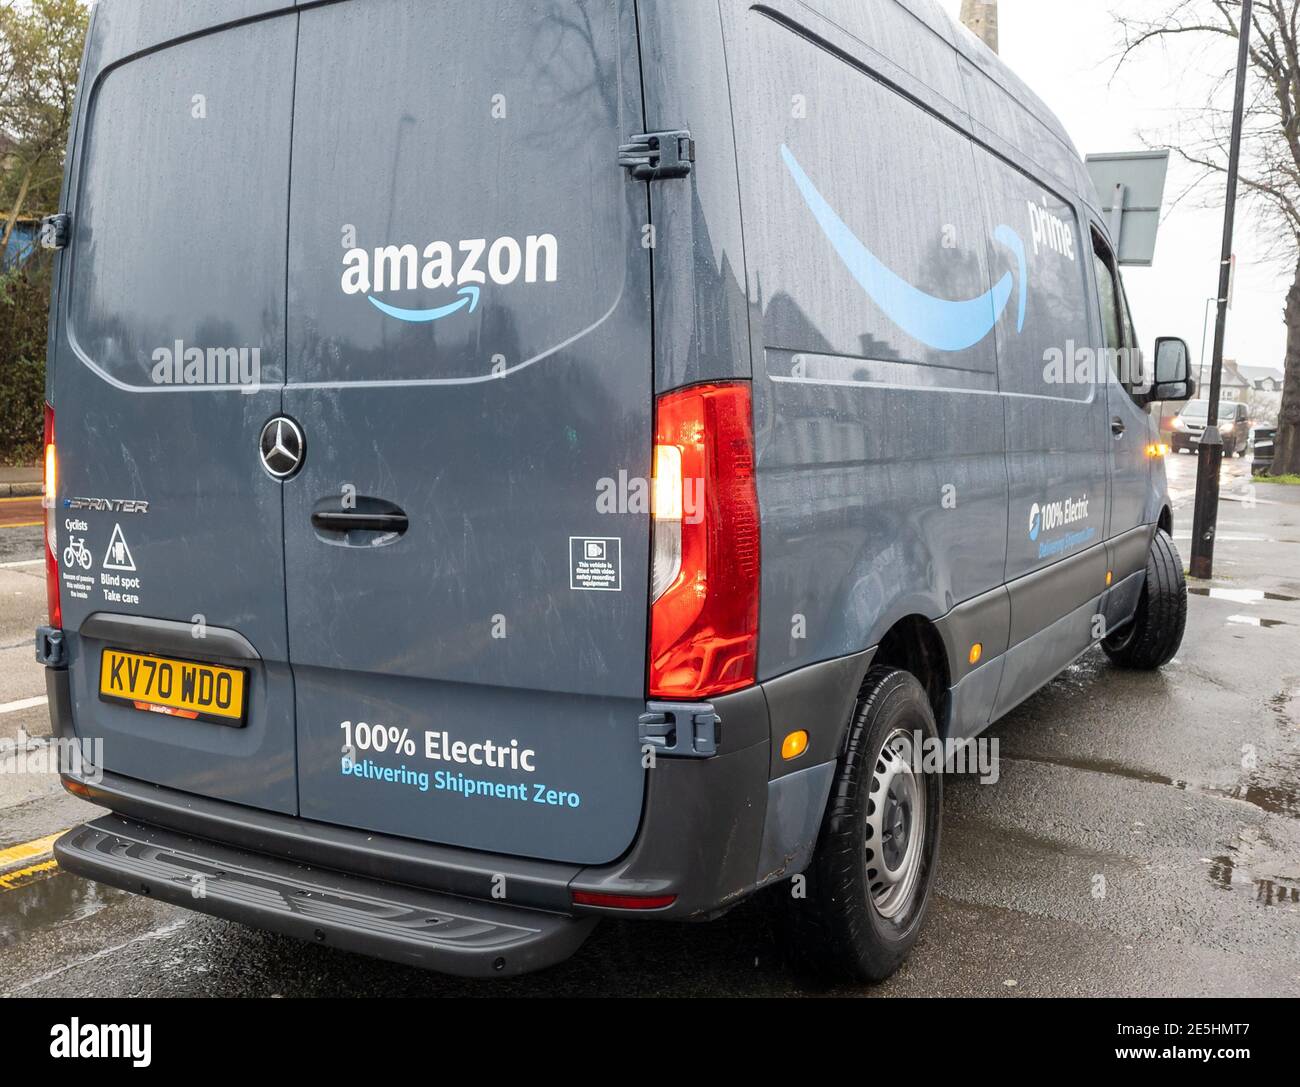 The all electric delivery vehicle of the online retailer Amazon. Stock Photo